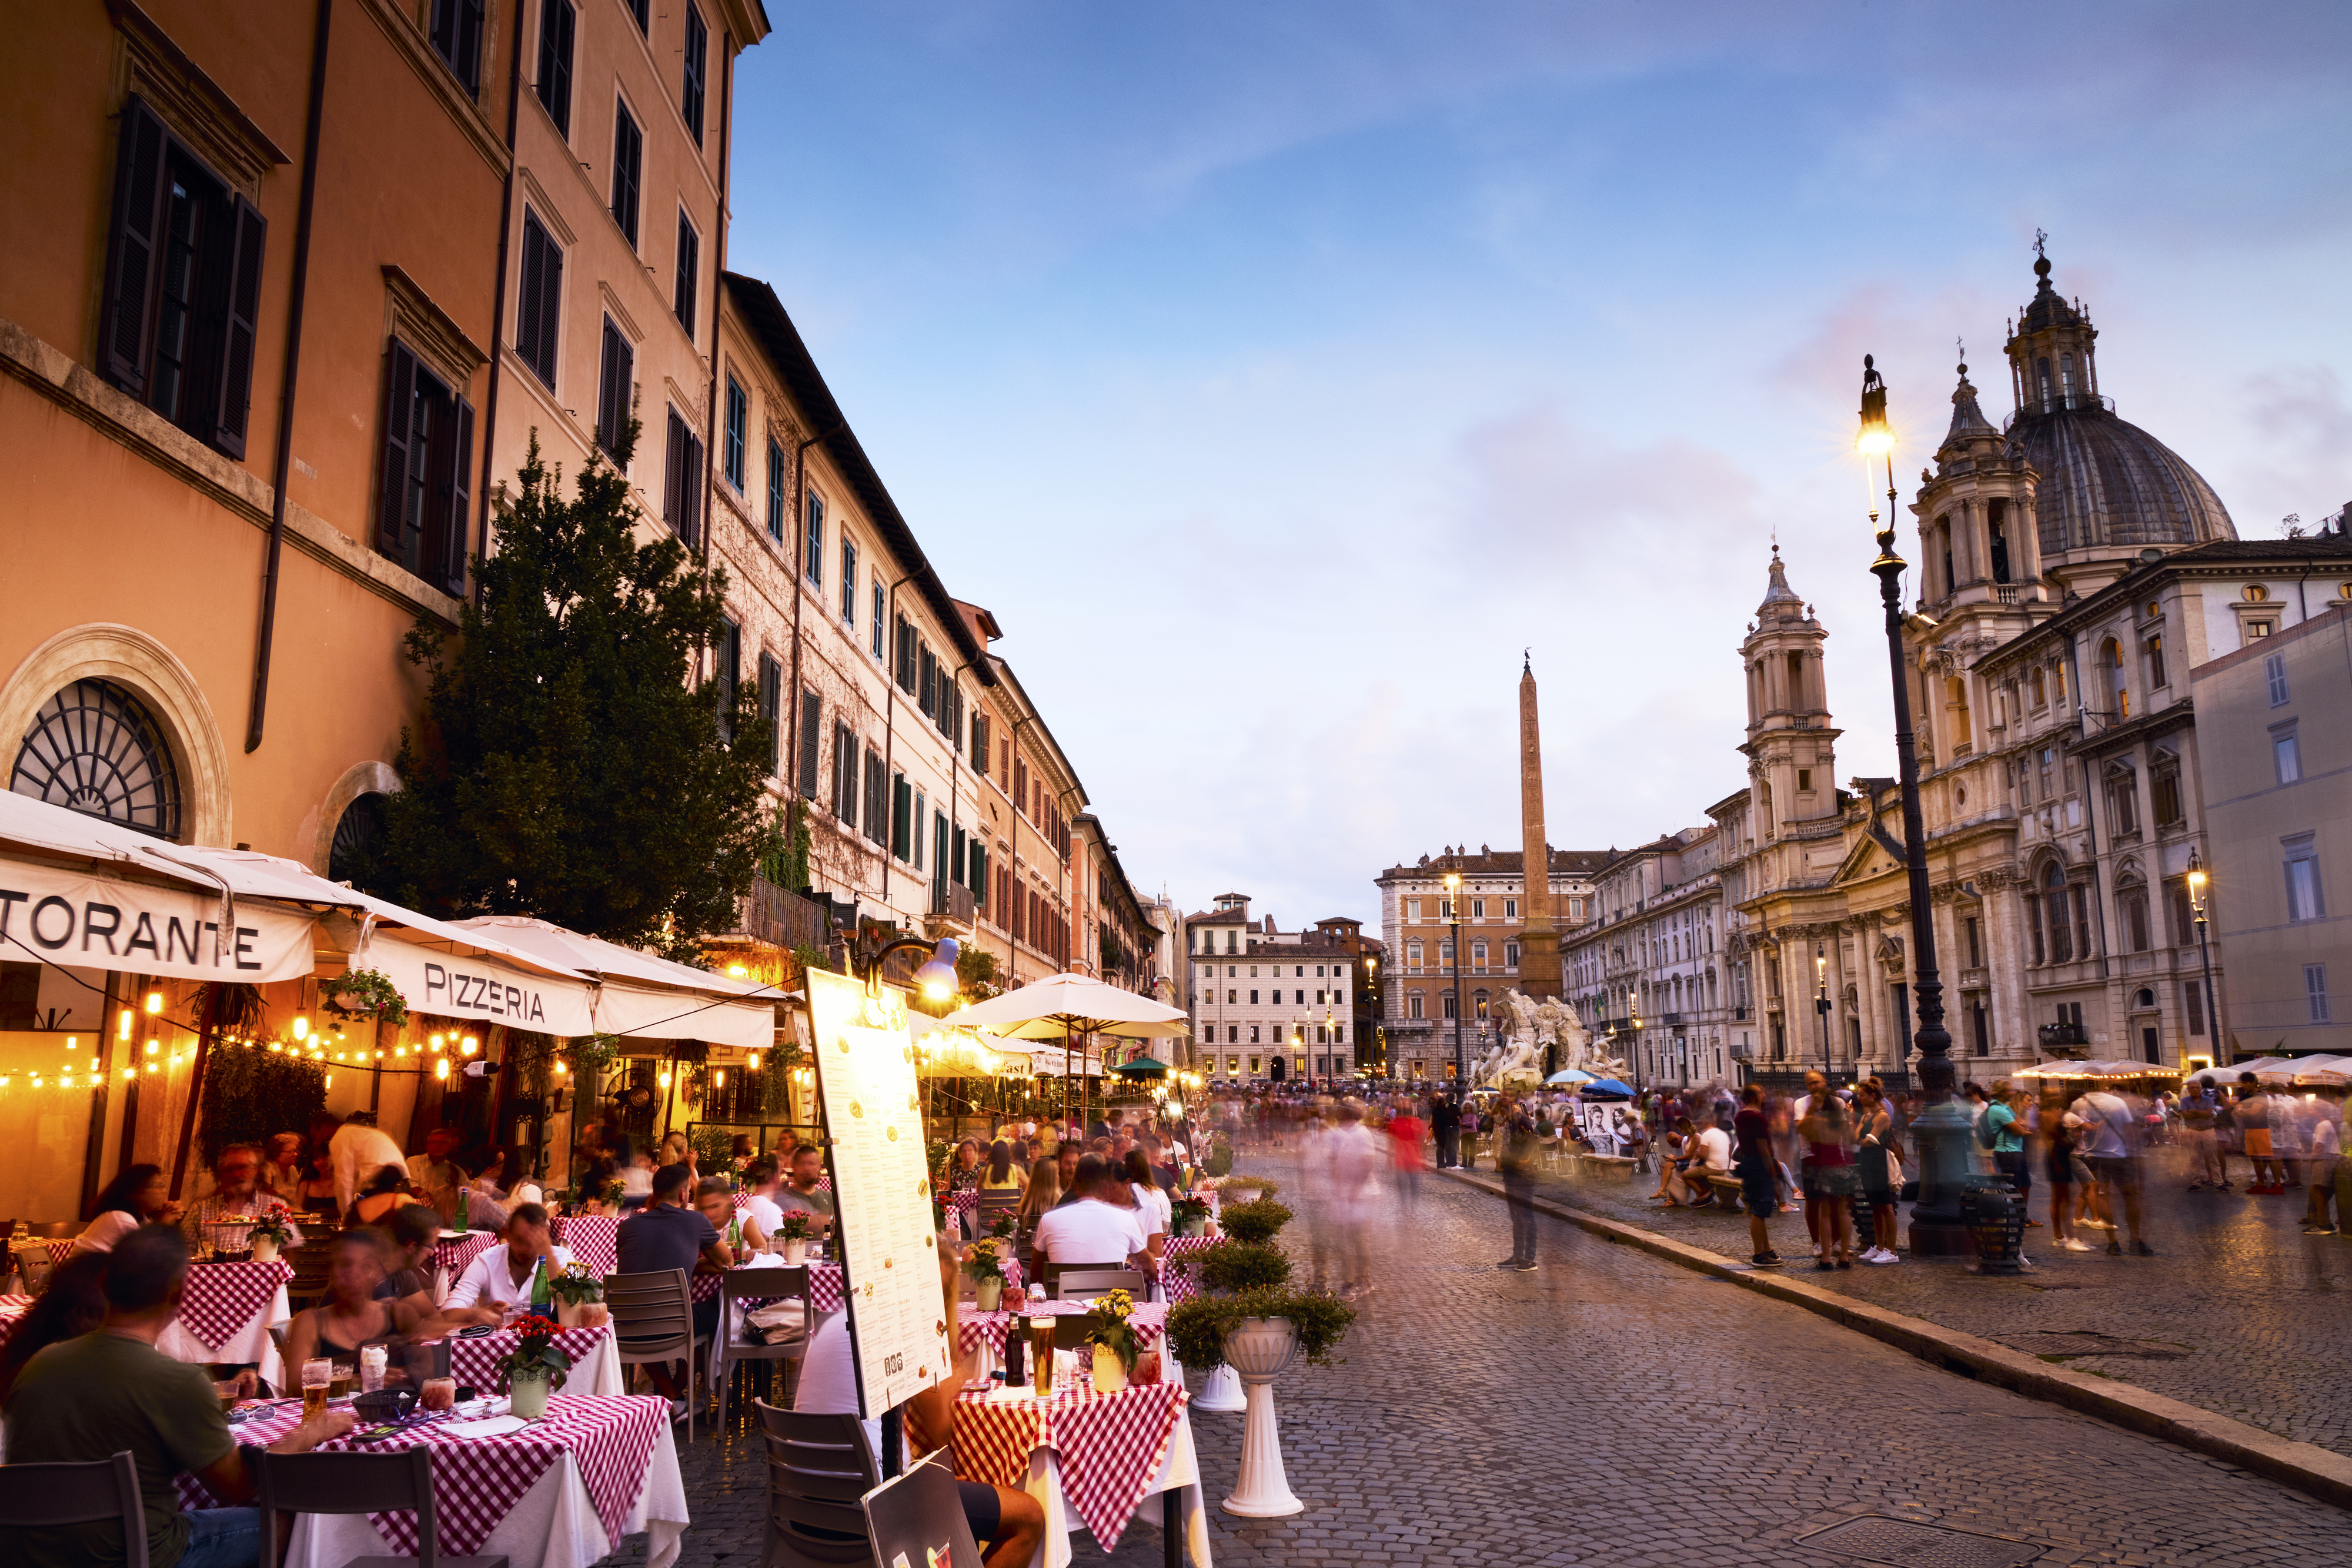 people dining outdoors in Piazza Navona in Rome, Italy